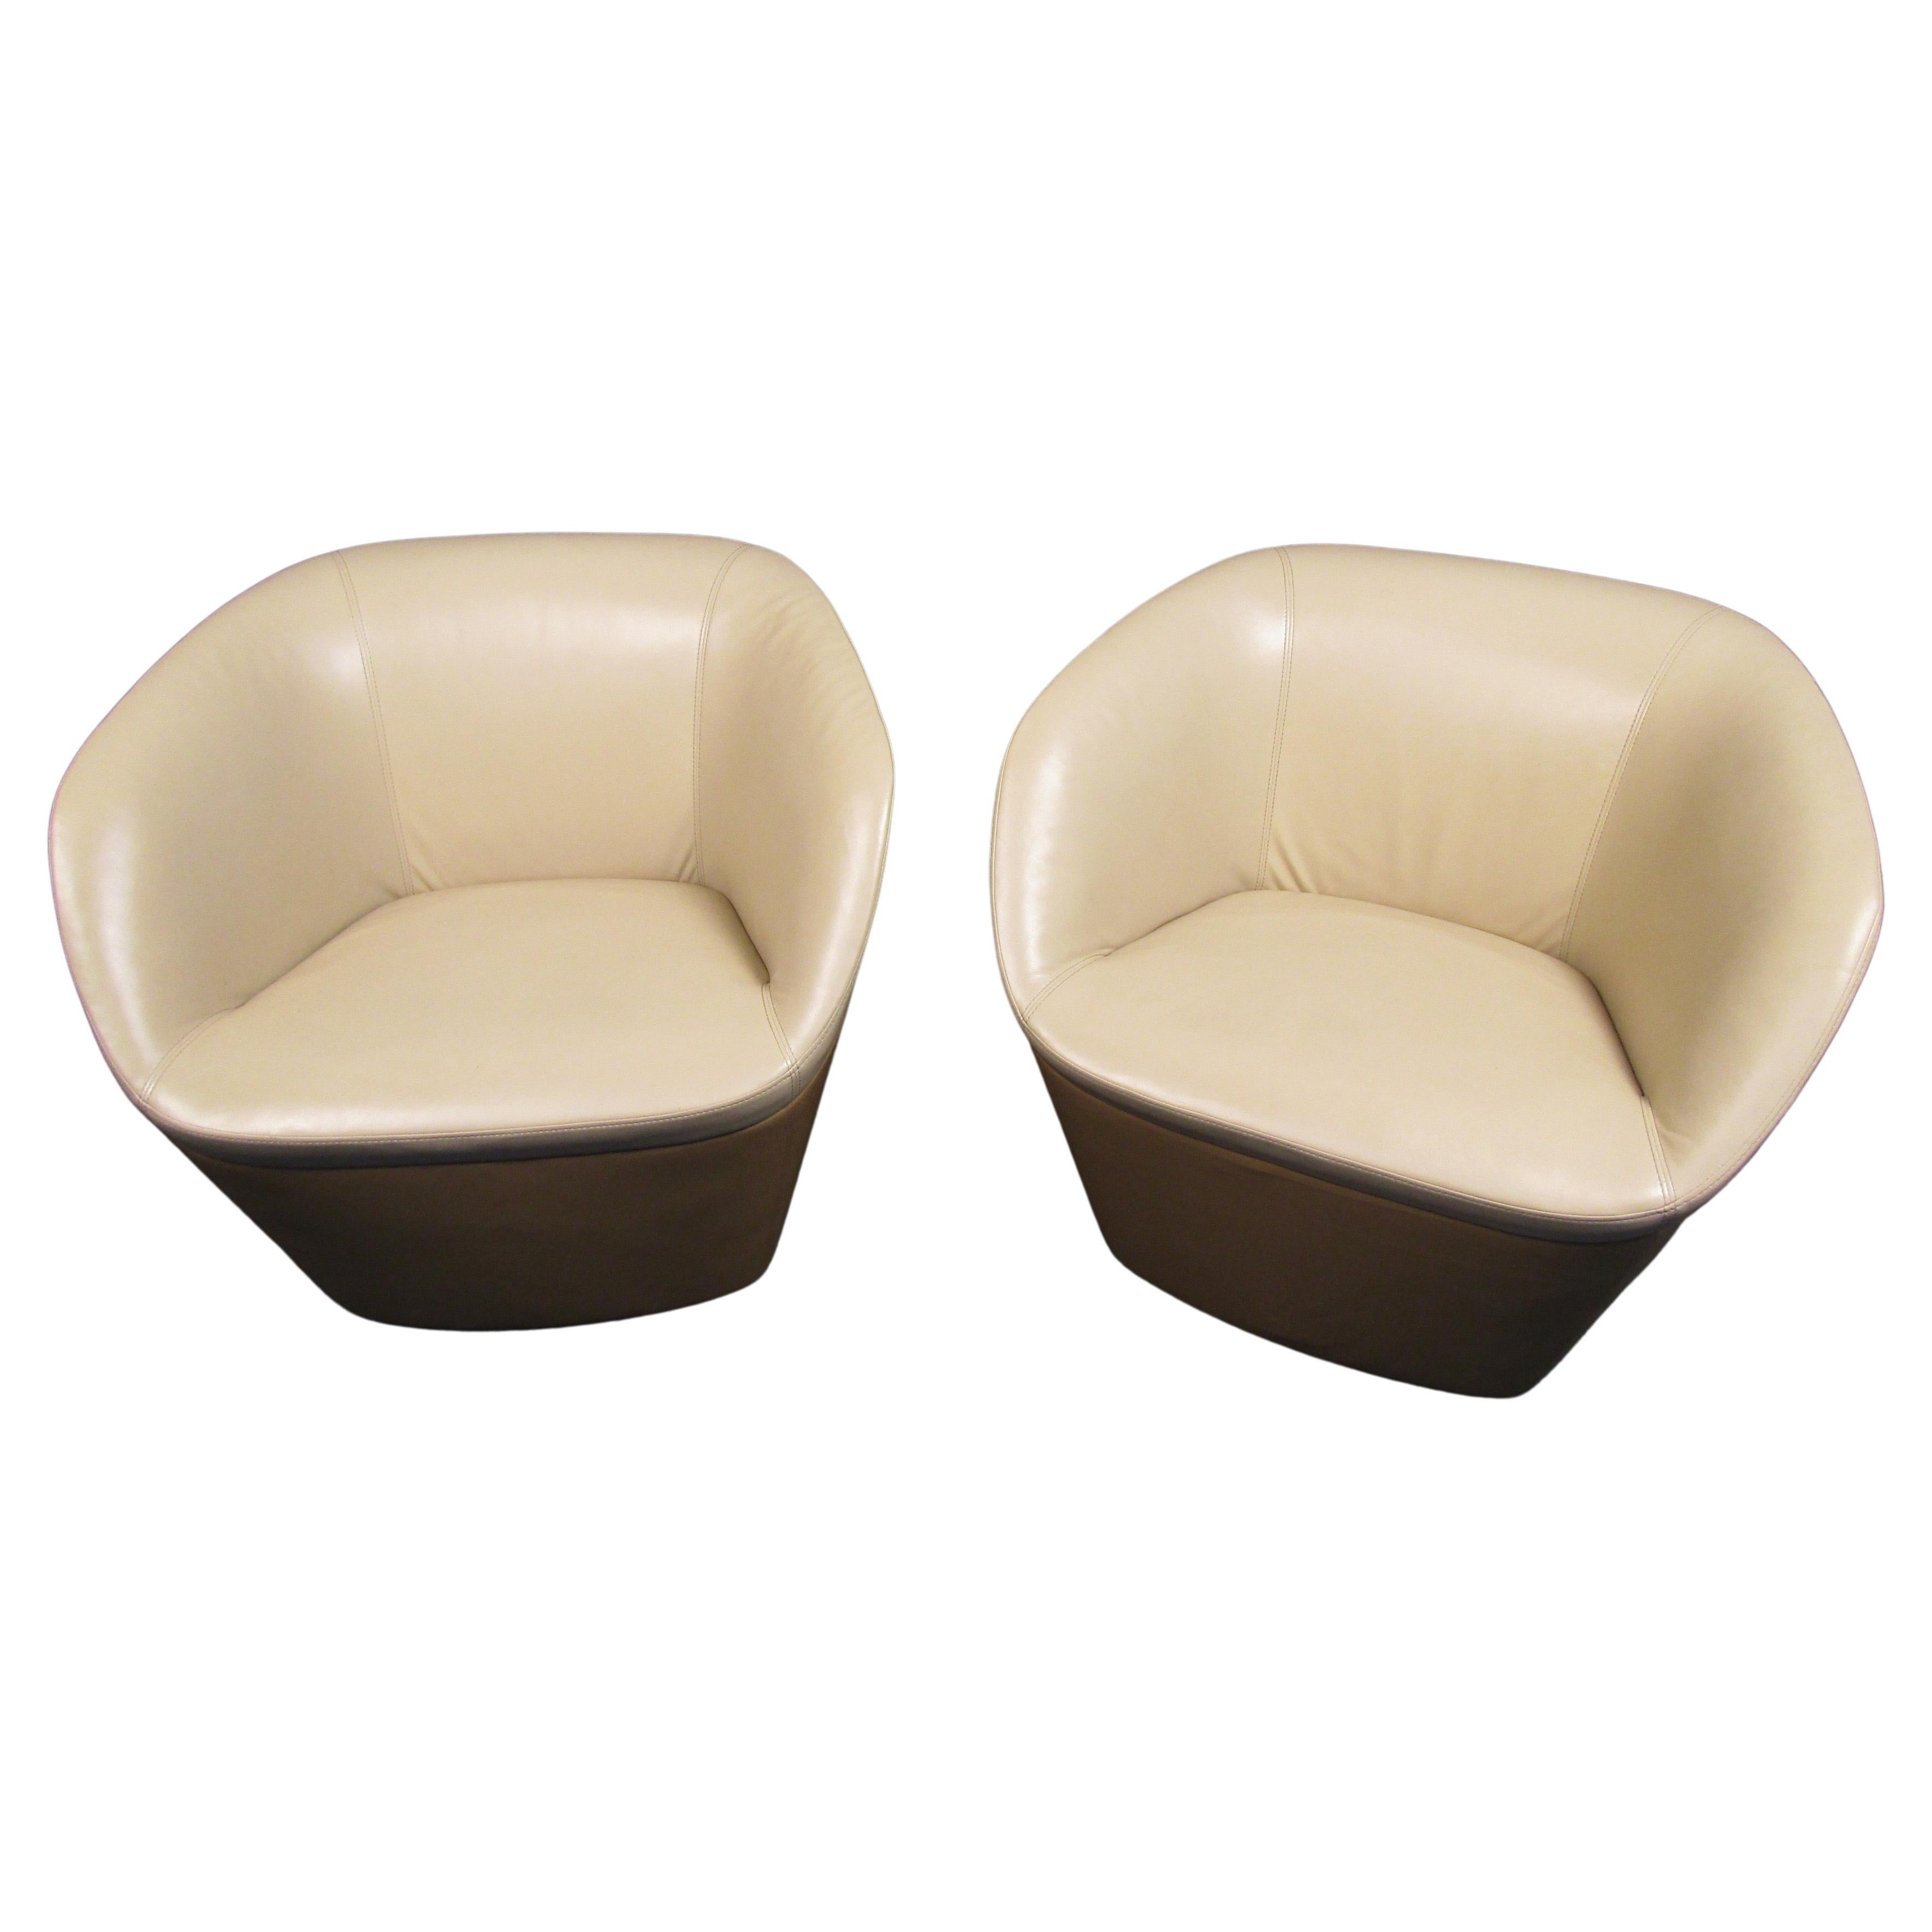 Pair of Vintage Modern Two-Tone Leather Tub Chairs